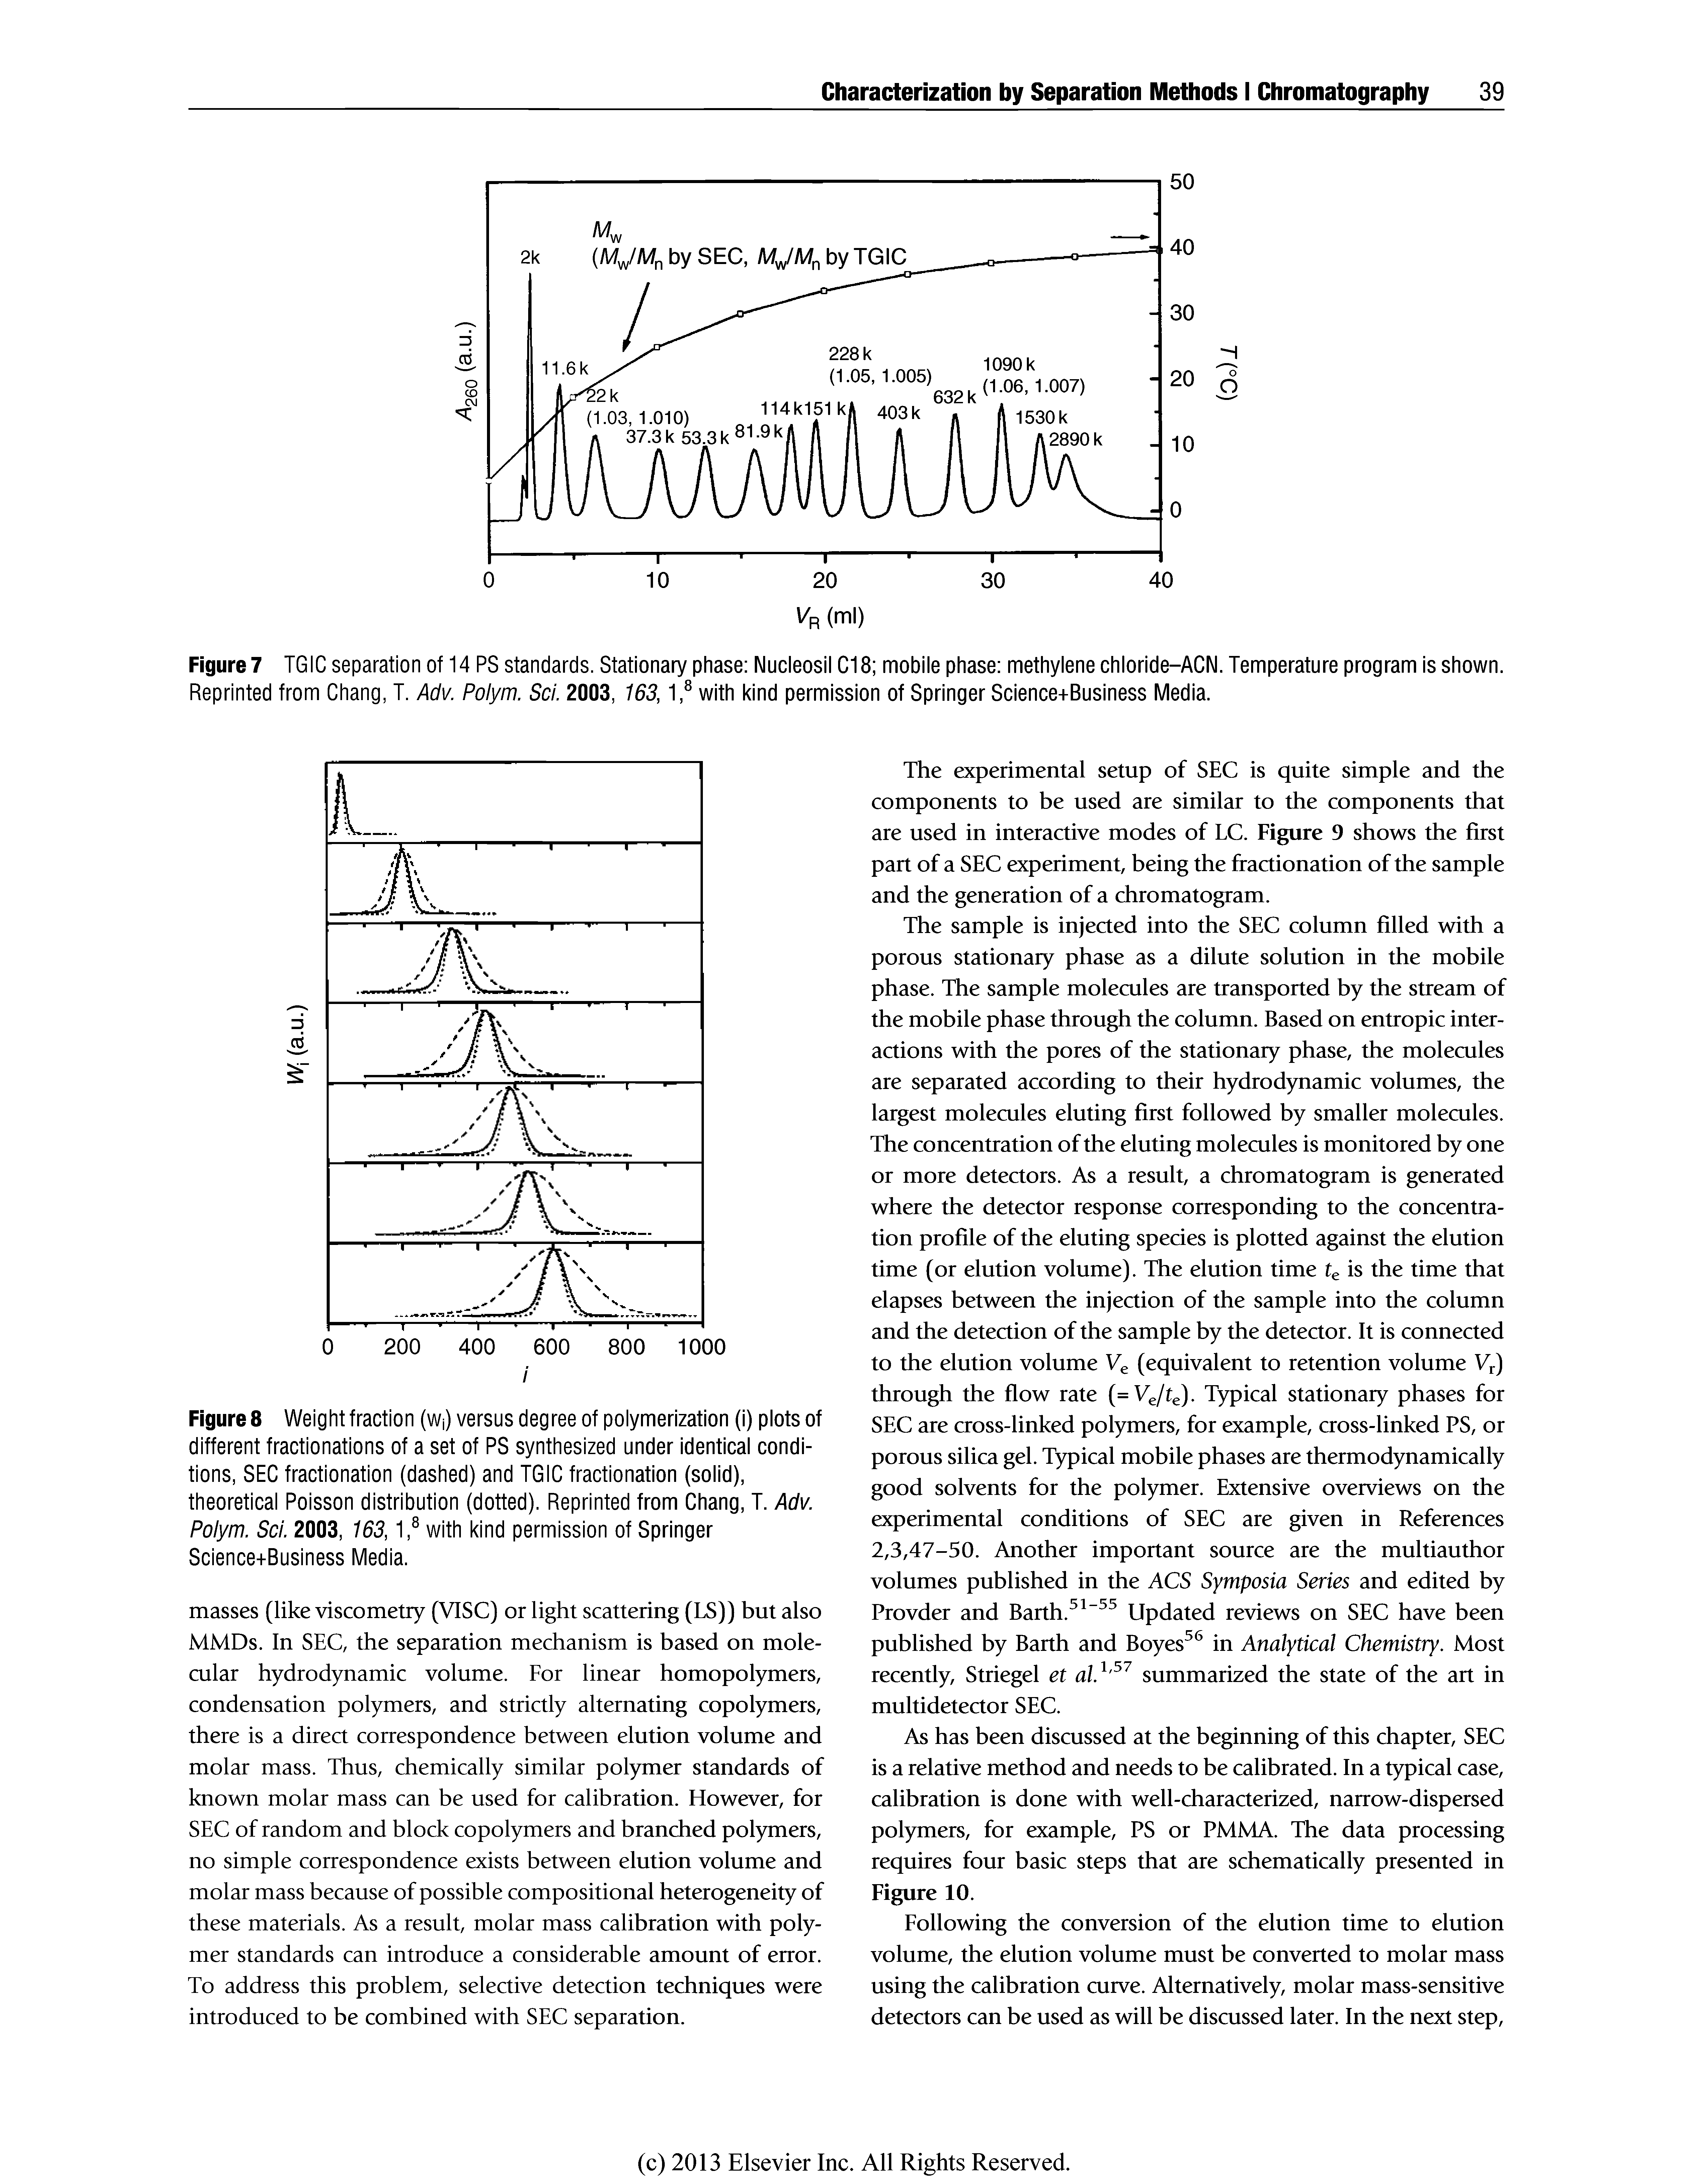 Figure 8 Weight fraction (W ) versus degree of poiymerization (i) plots of different fractionations of a set of PS synthesized under identical conditions, SEC fractionation (dashed) and TGiC fractionation (solid), theoreticai Poisson distribution (dotted). Reprinted from Chang, T. Adv. Polym. Sci. 2003, 163,1, with kind permission of Springer Science+Business Media.